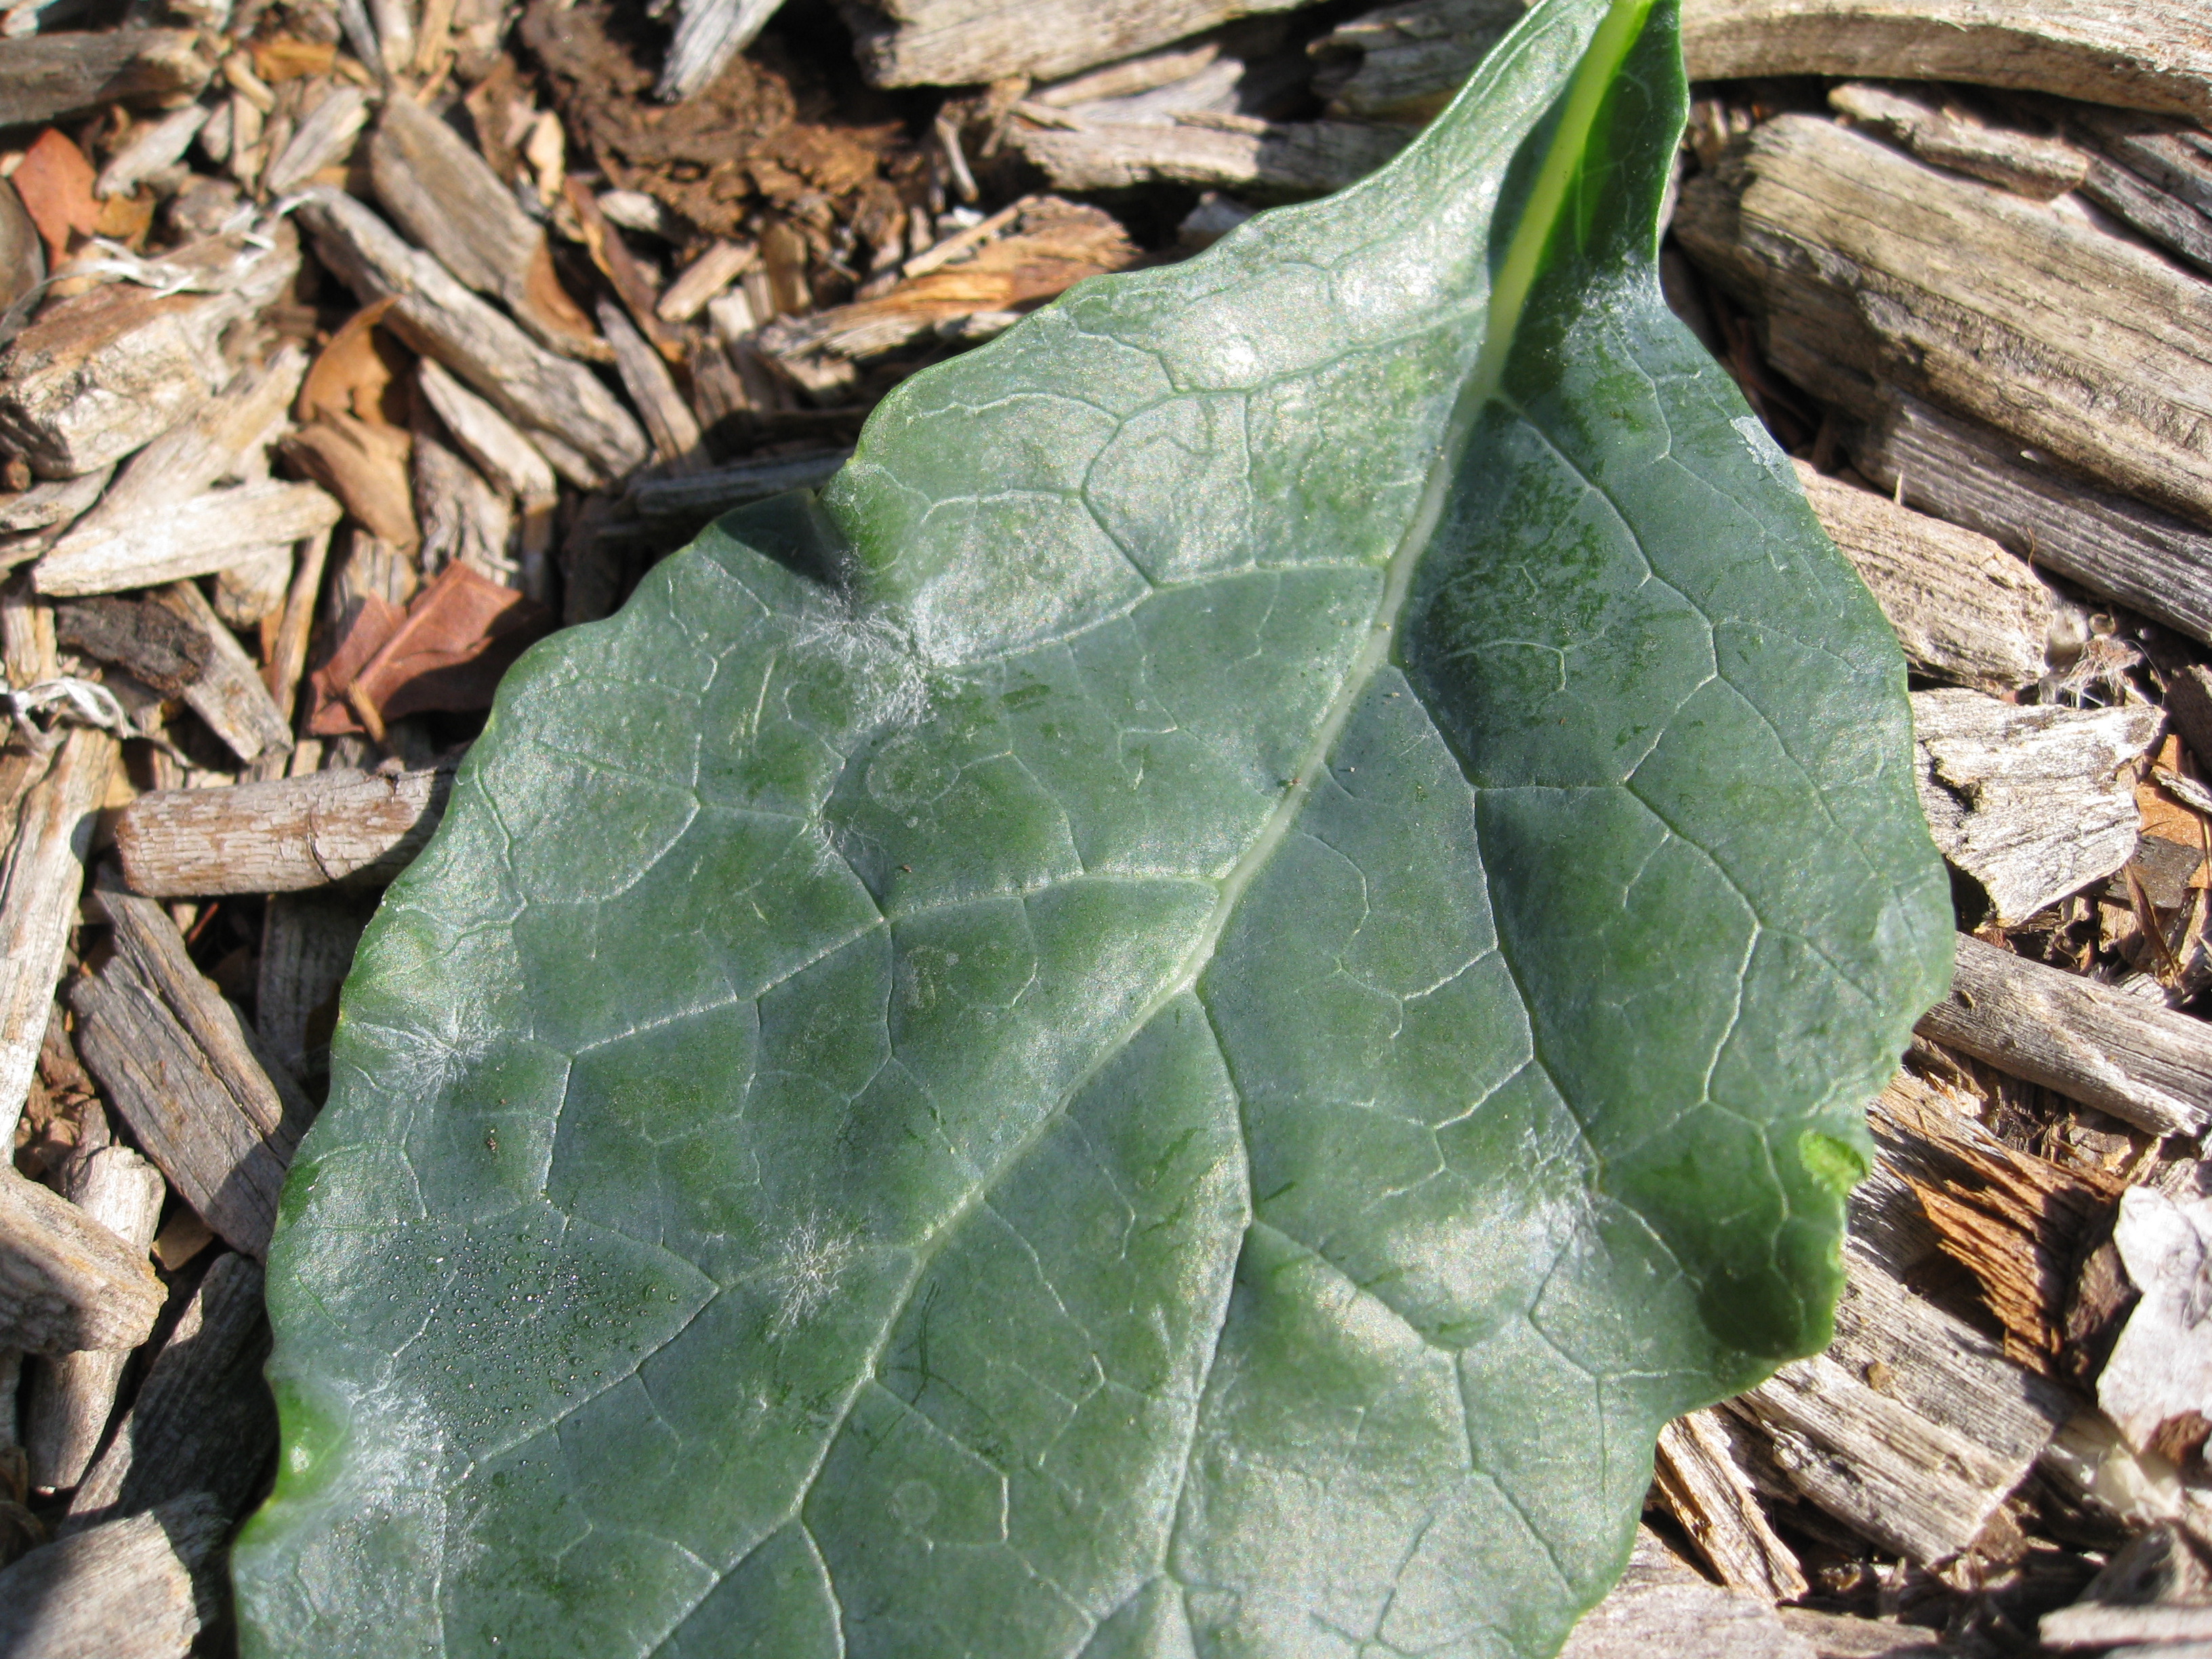 White patches on kale leaves indicate powdery mildew